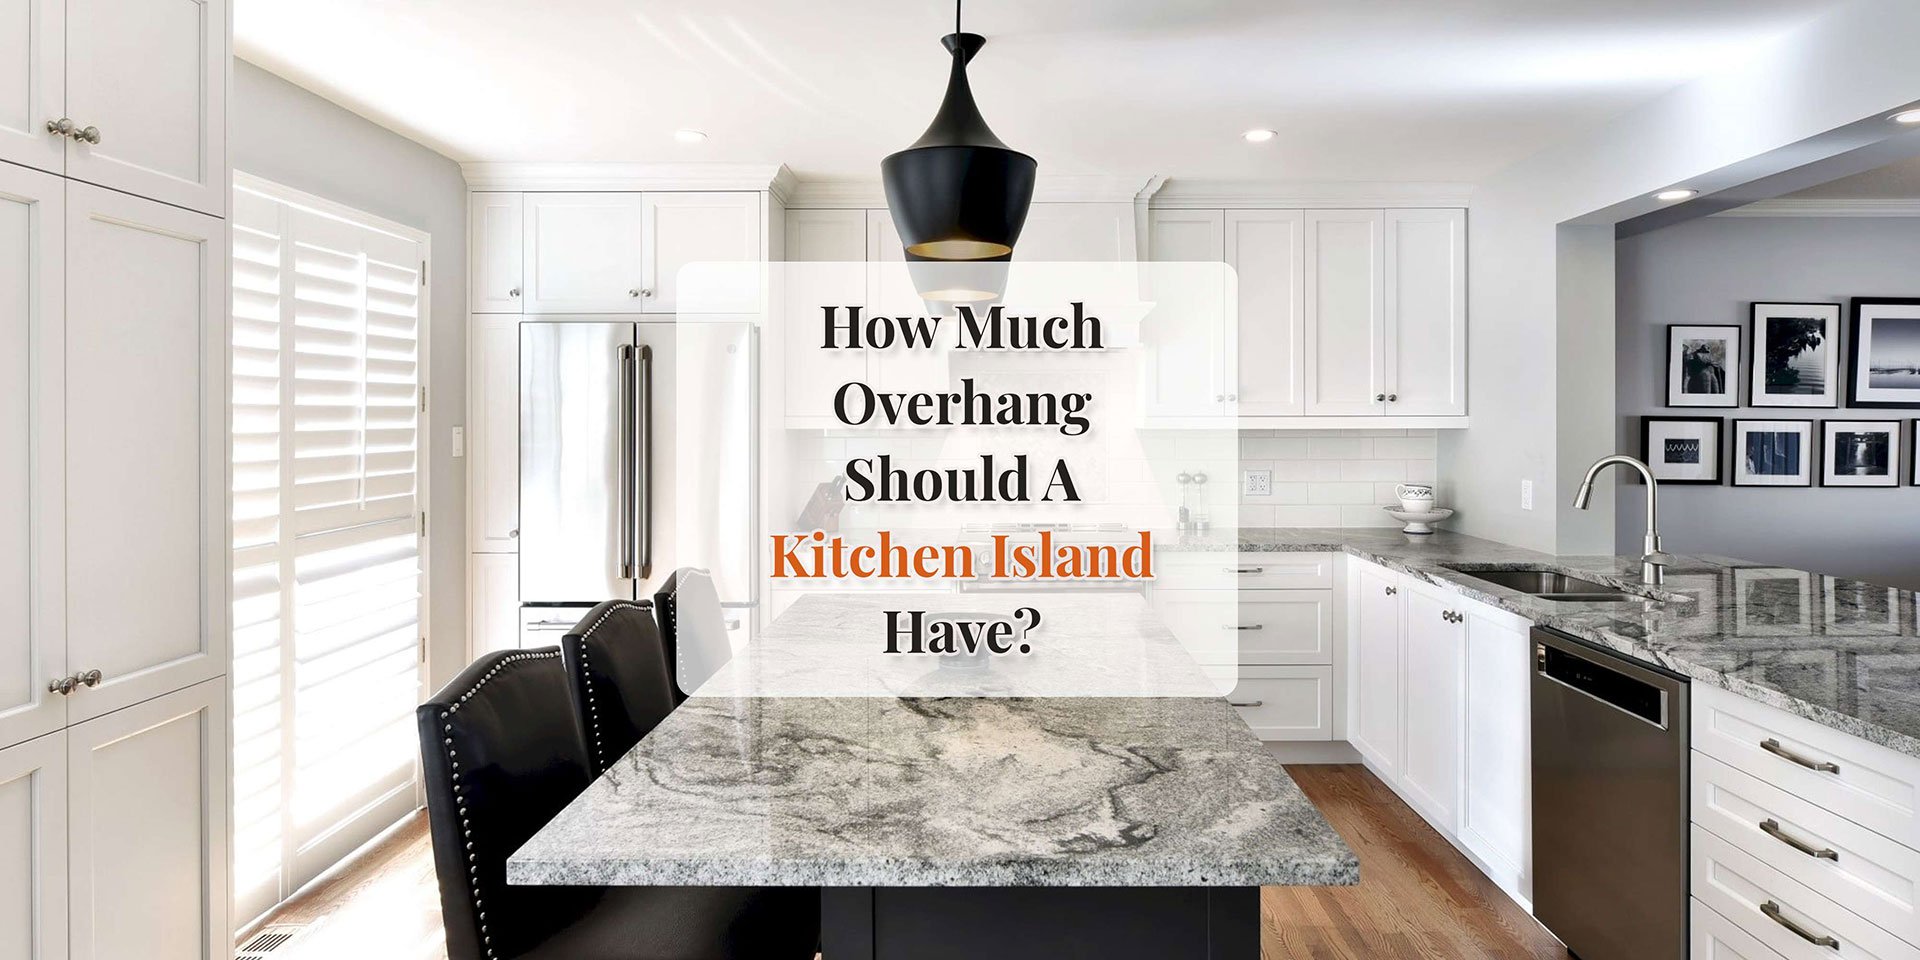 How Much Overhang Should A Kitchen Island Have?